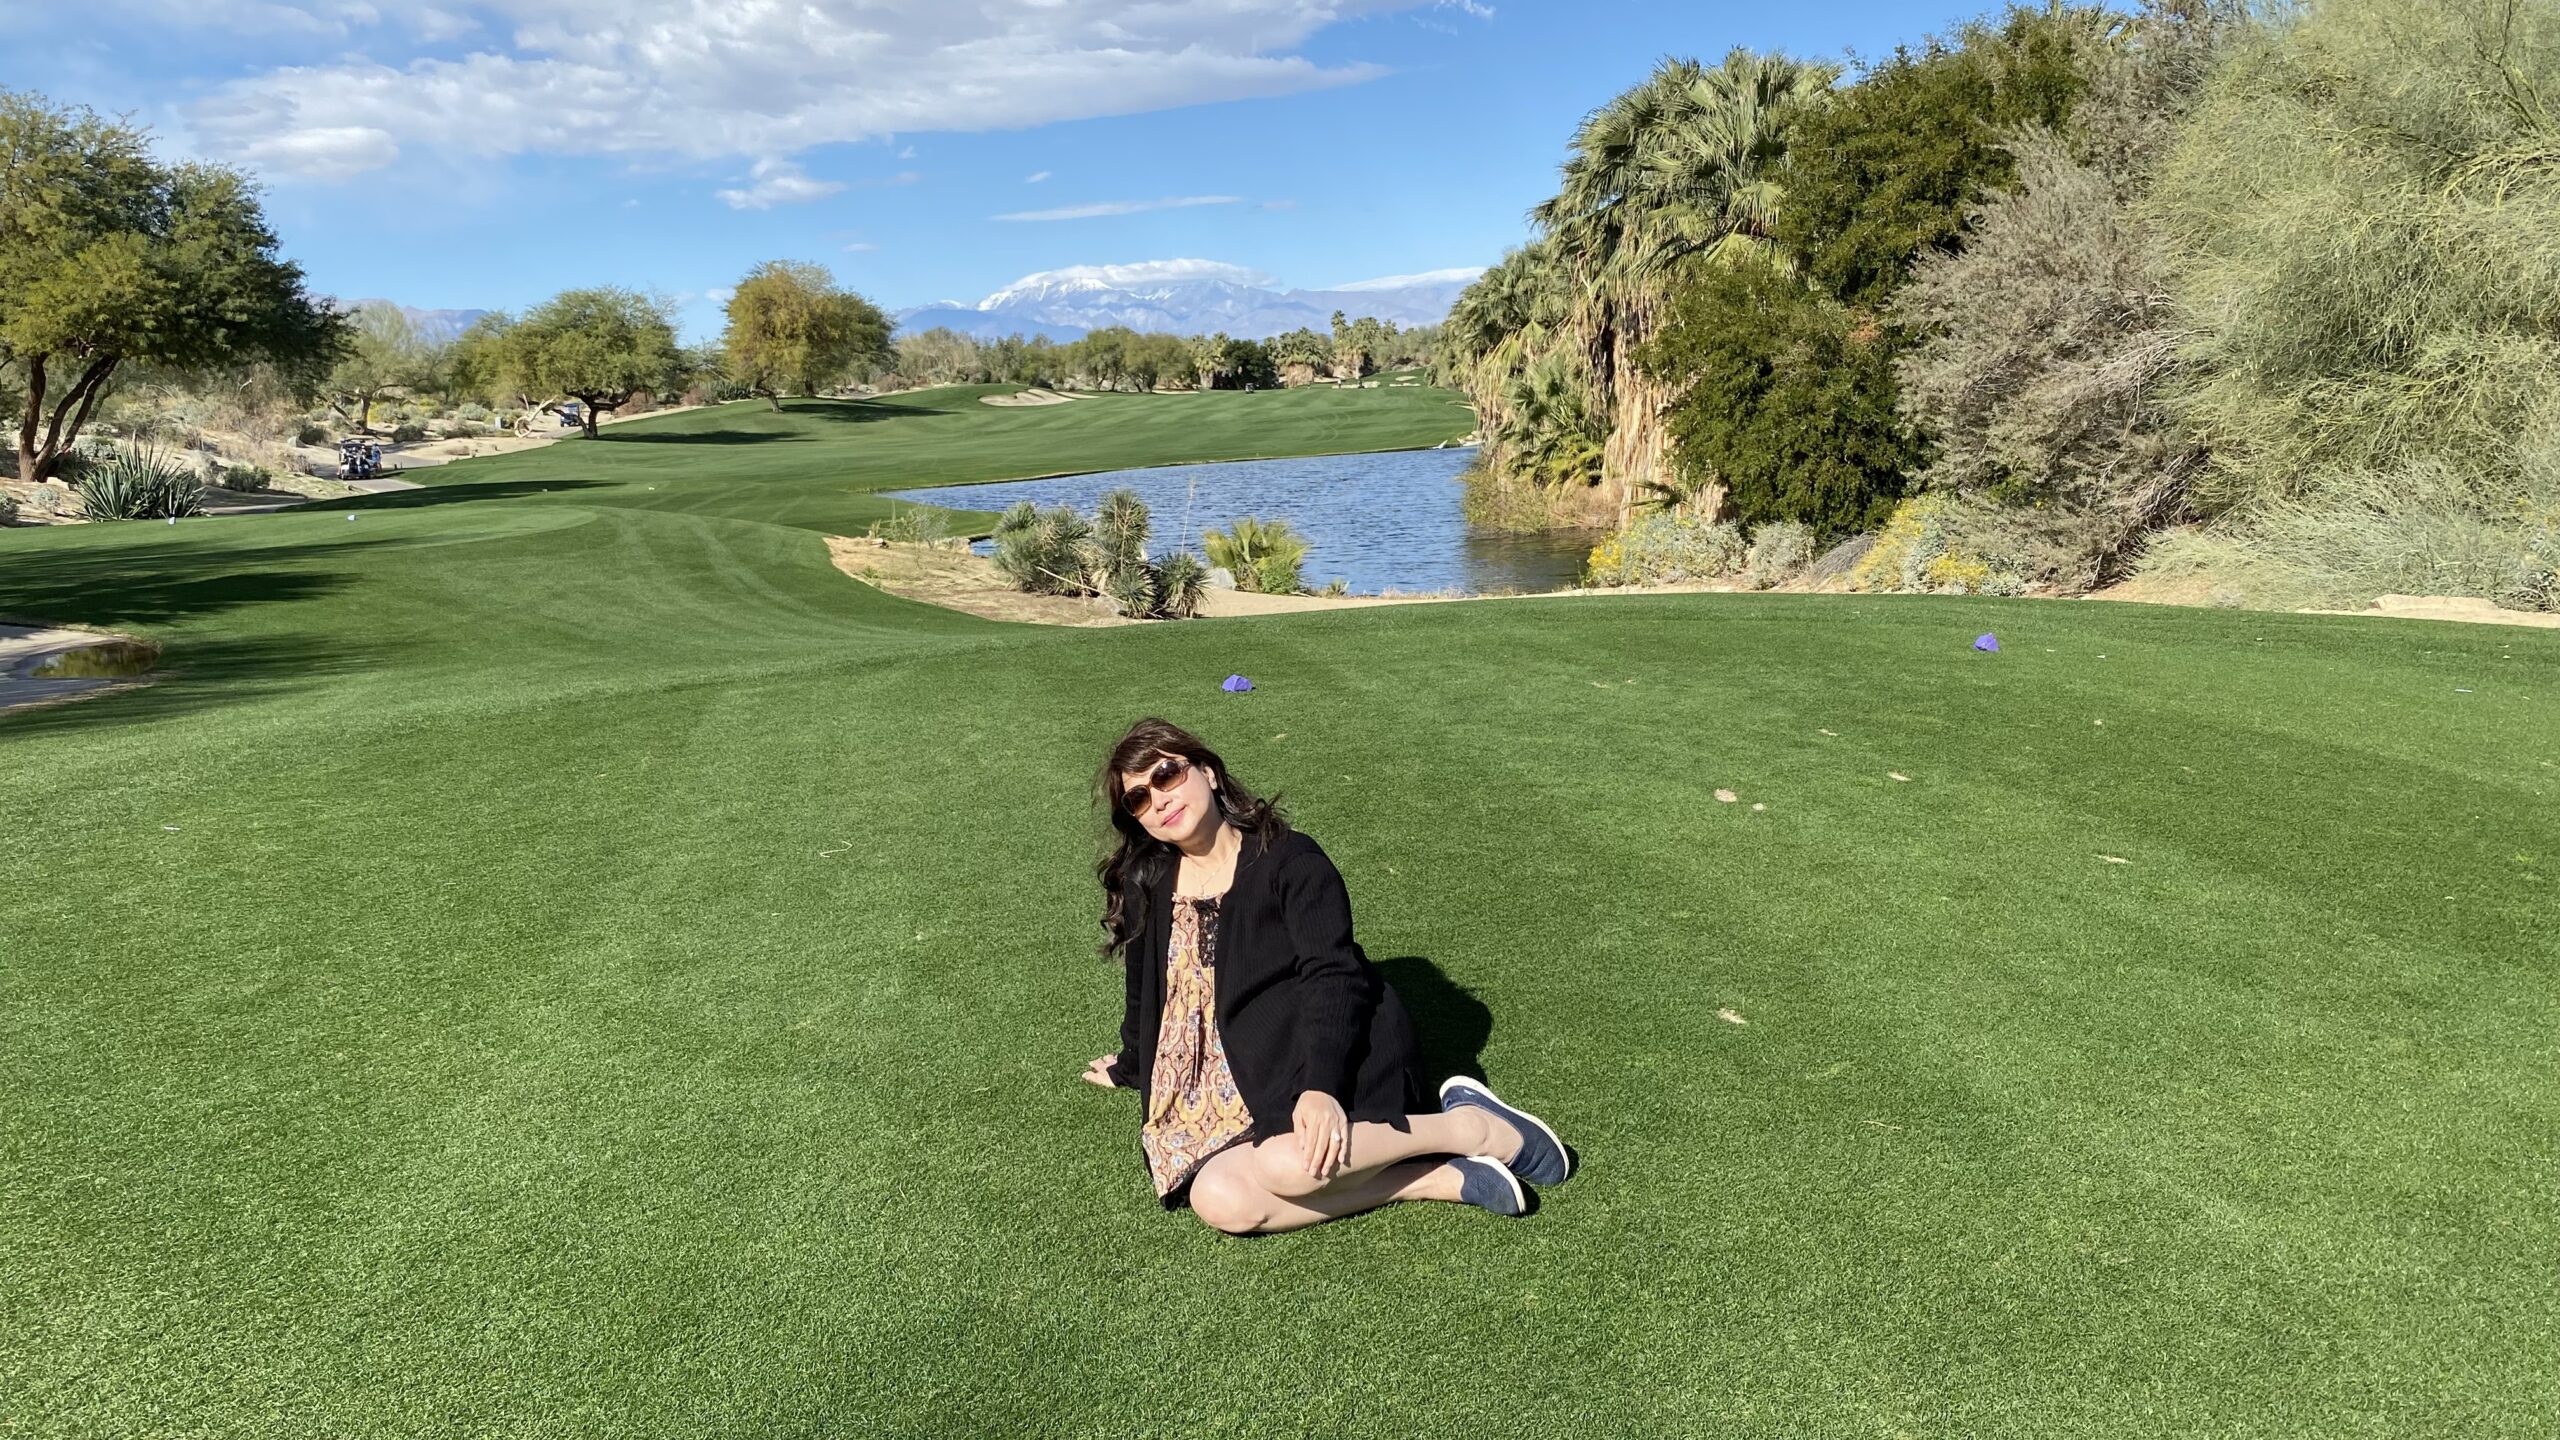 Oh my buhay in Palm Springs golf course